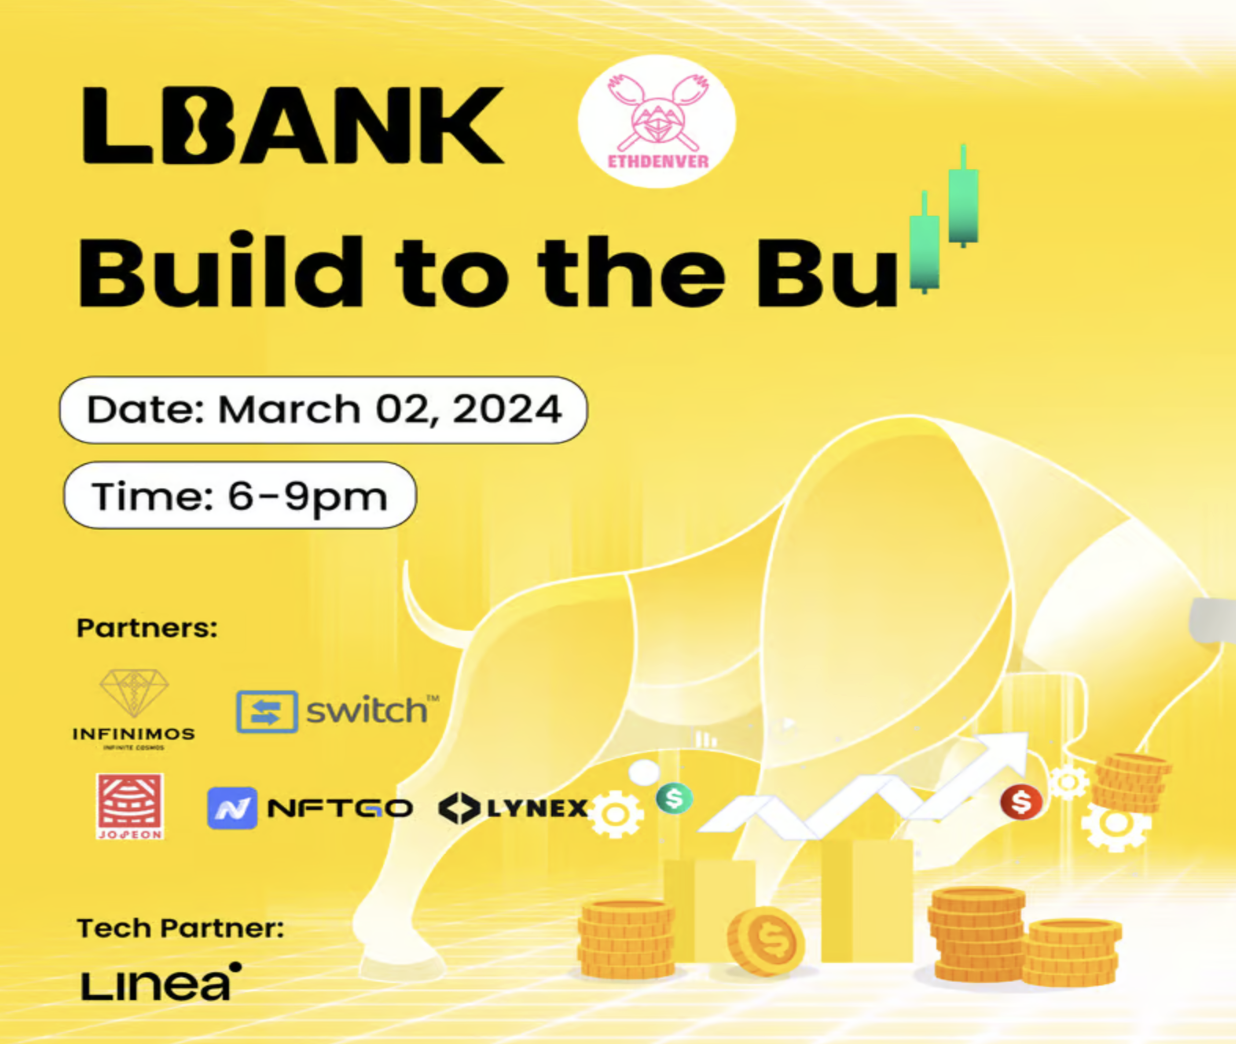 LBank’s upcoming Build to the Bull event